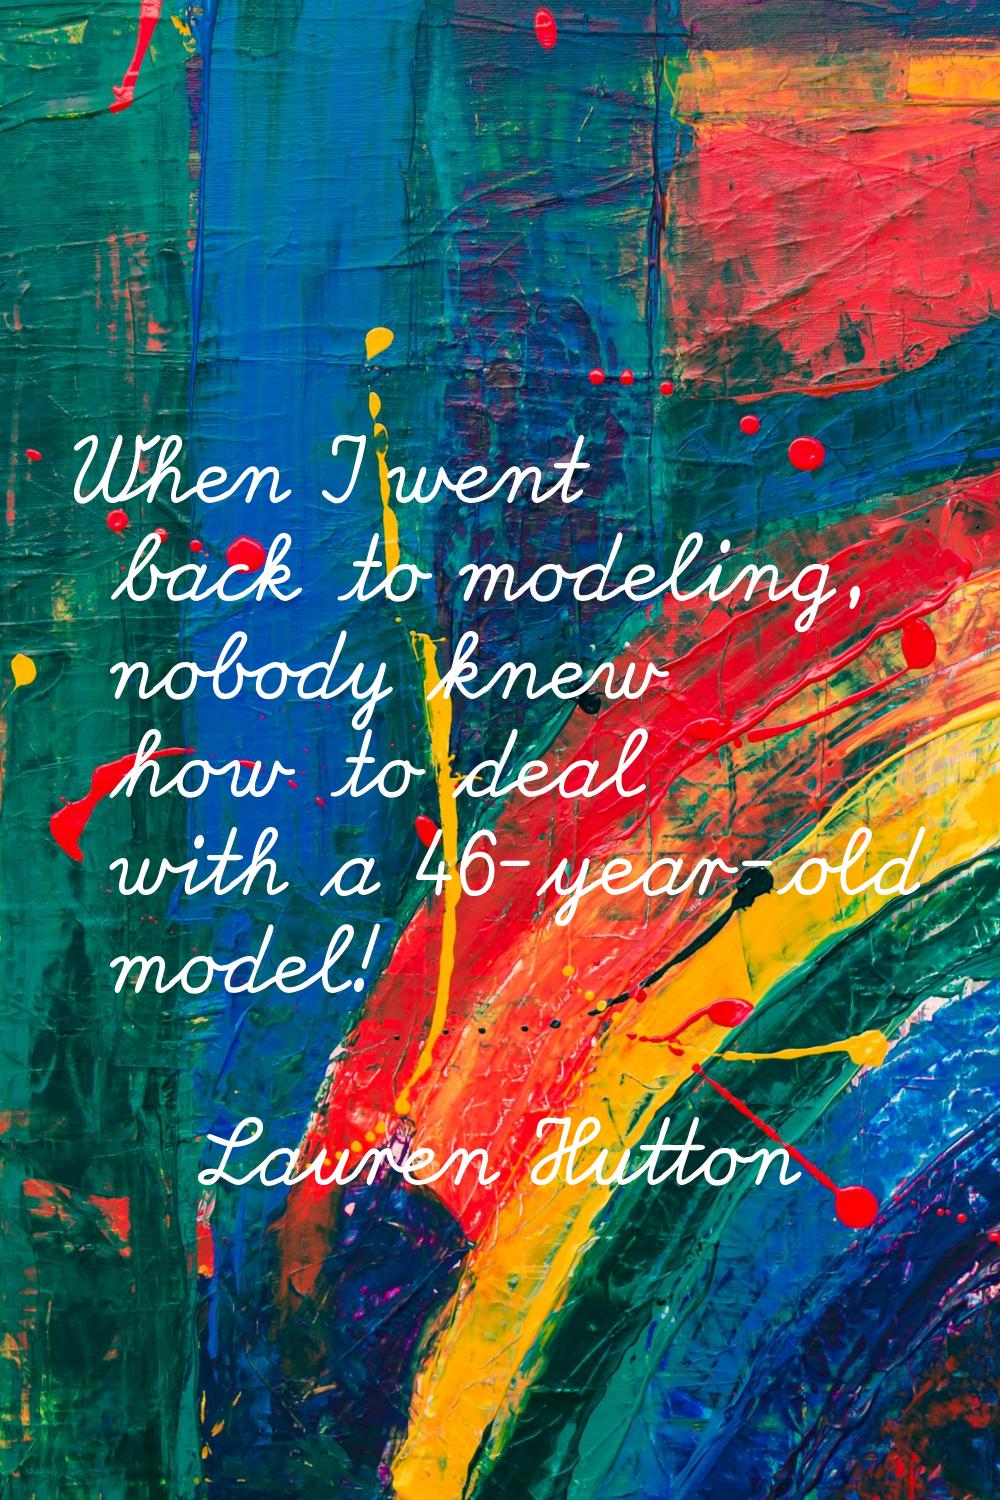 When I went back to modeling, nobody knew how to deal with a 46-year-old model!